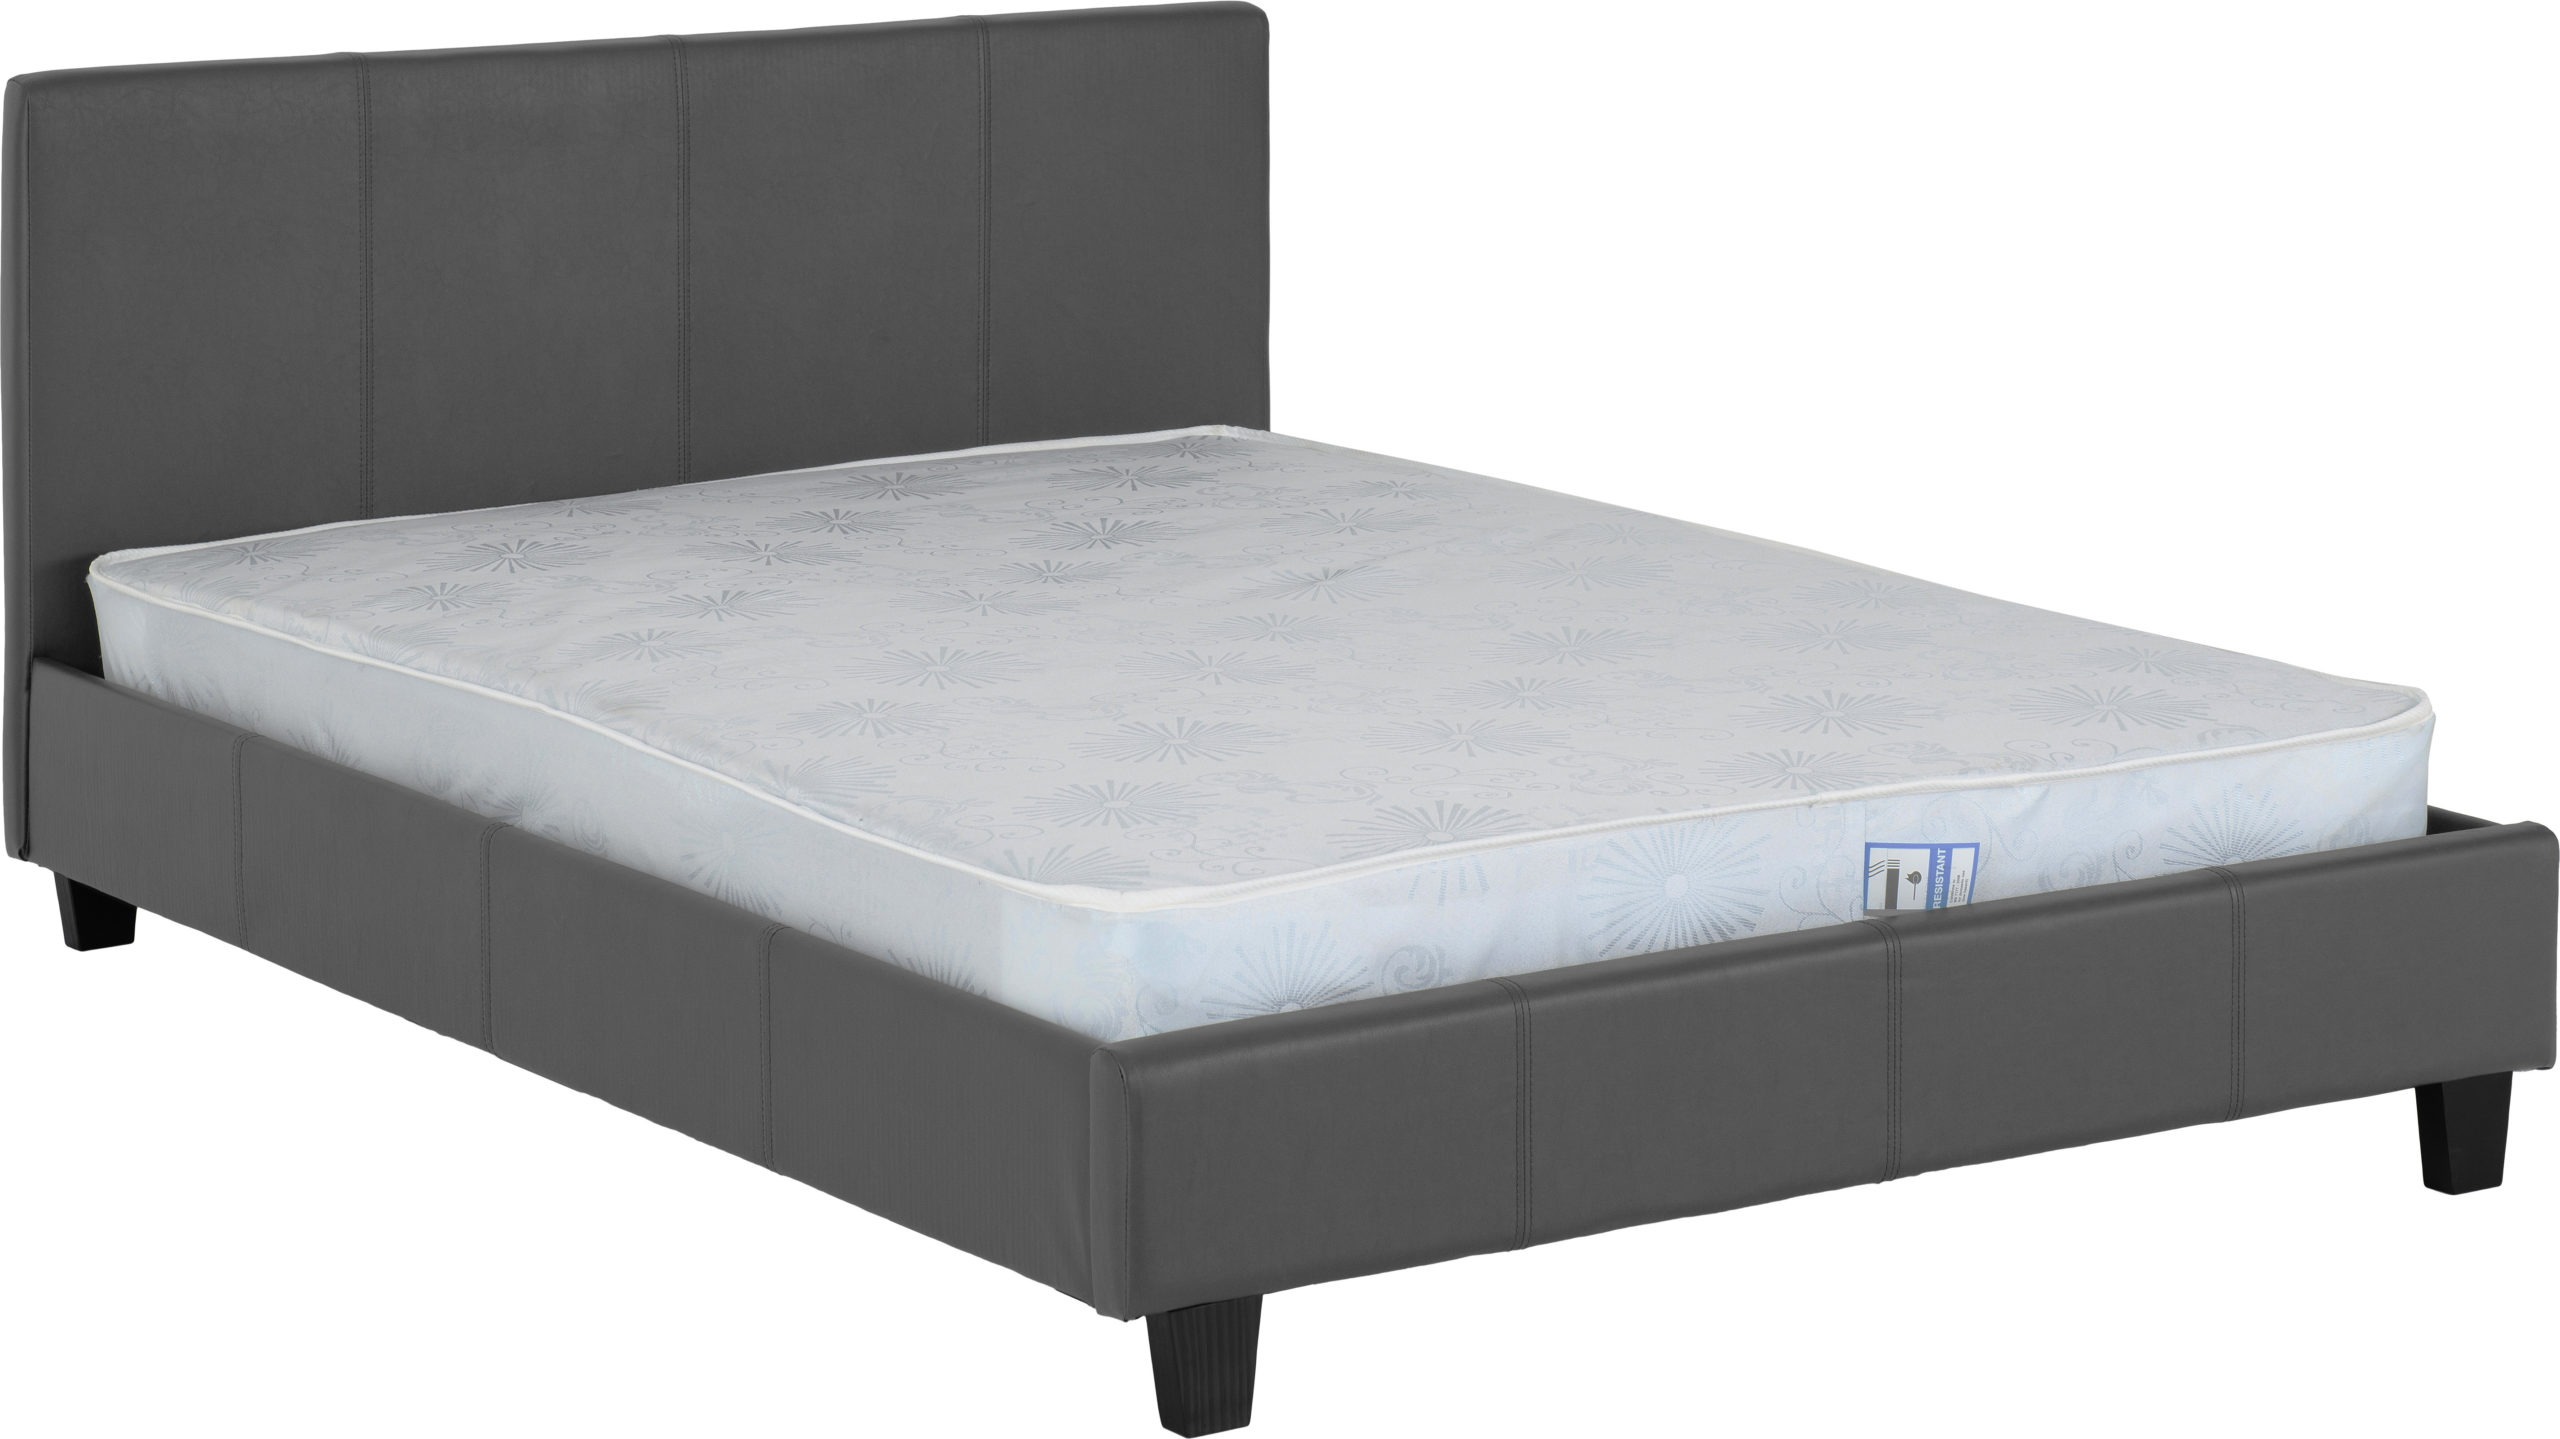 Prado 4' Bed In Black, Grey or Brown Faux Leather - Click Image to Close